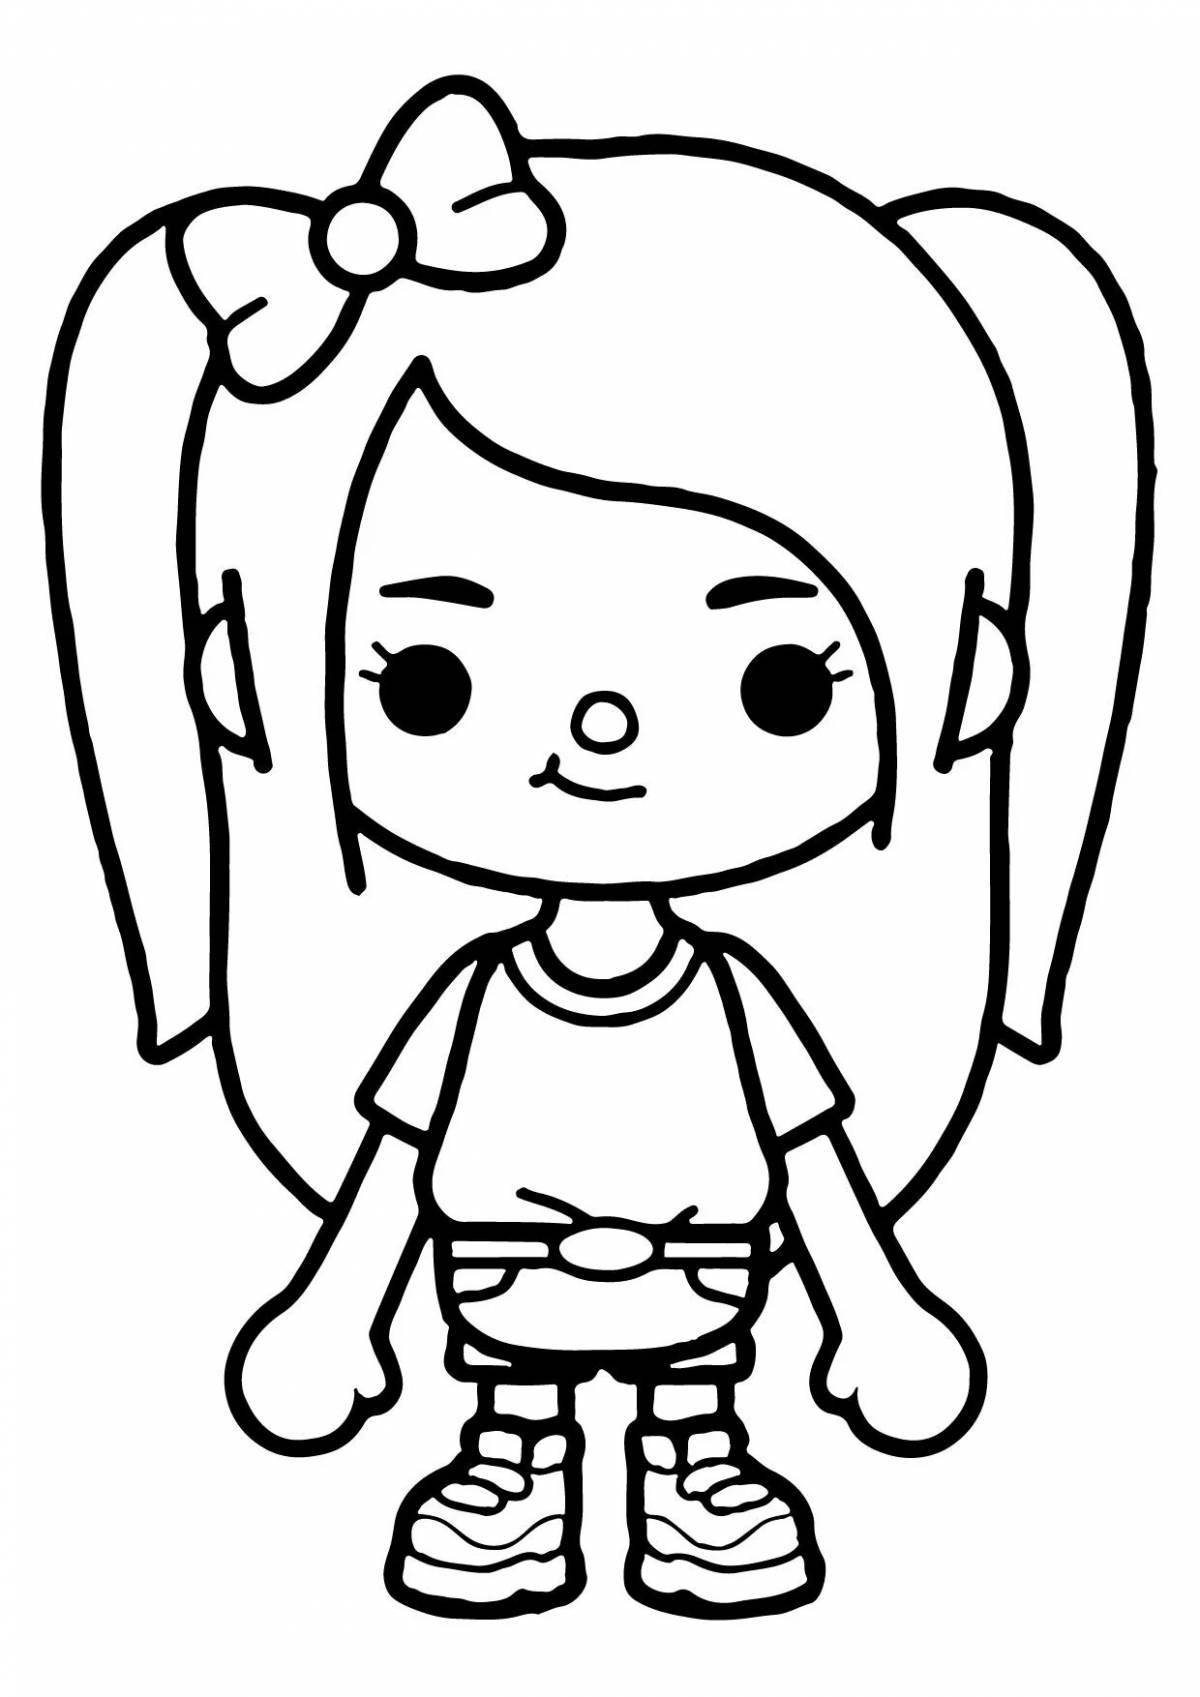 Animated side coloring pages only